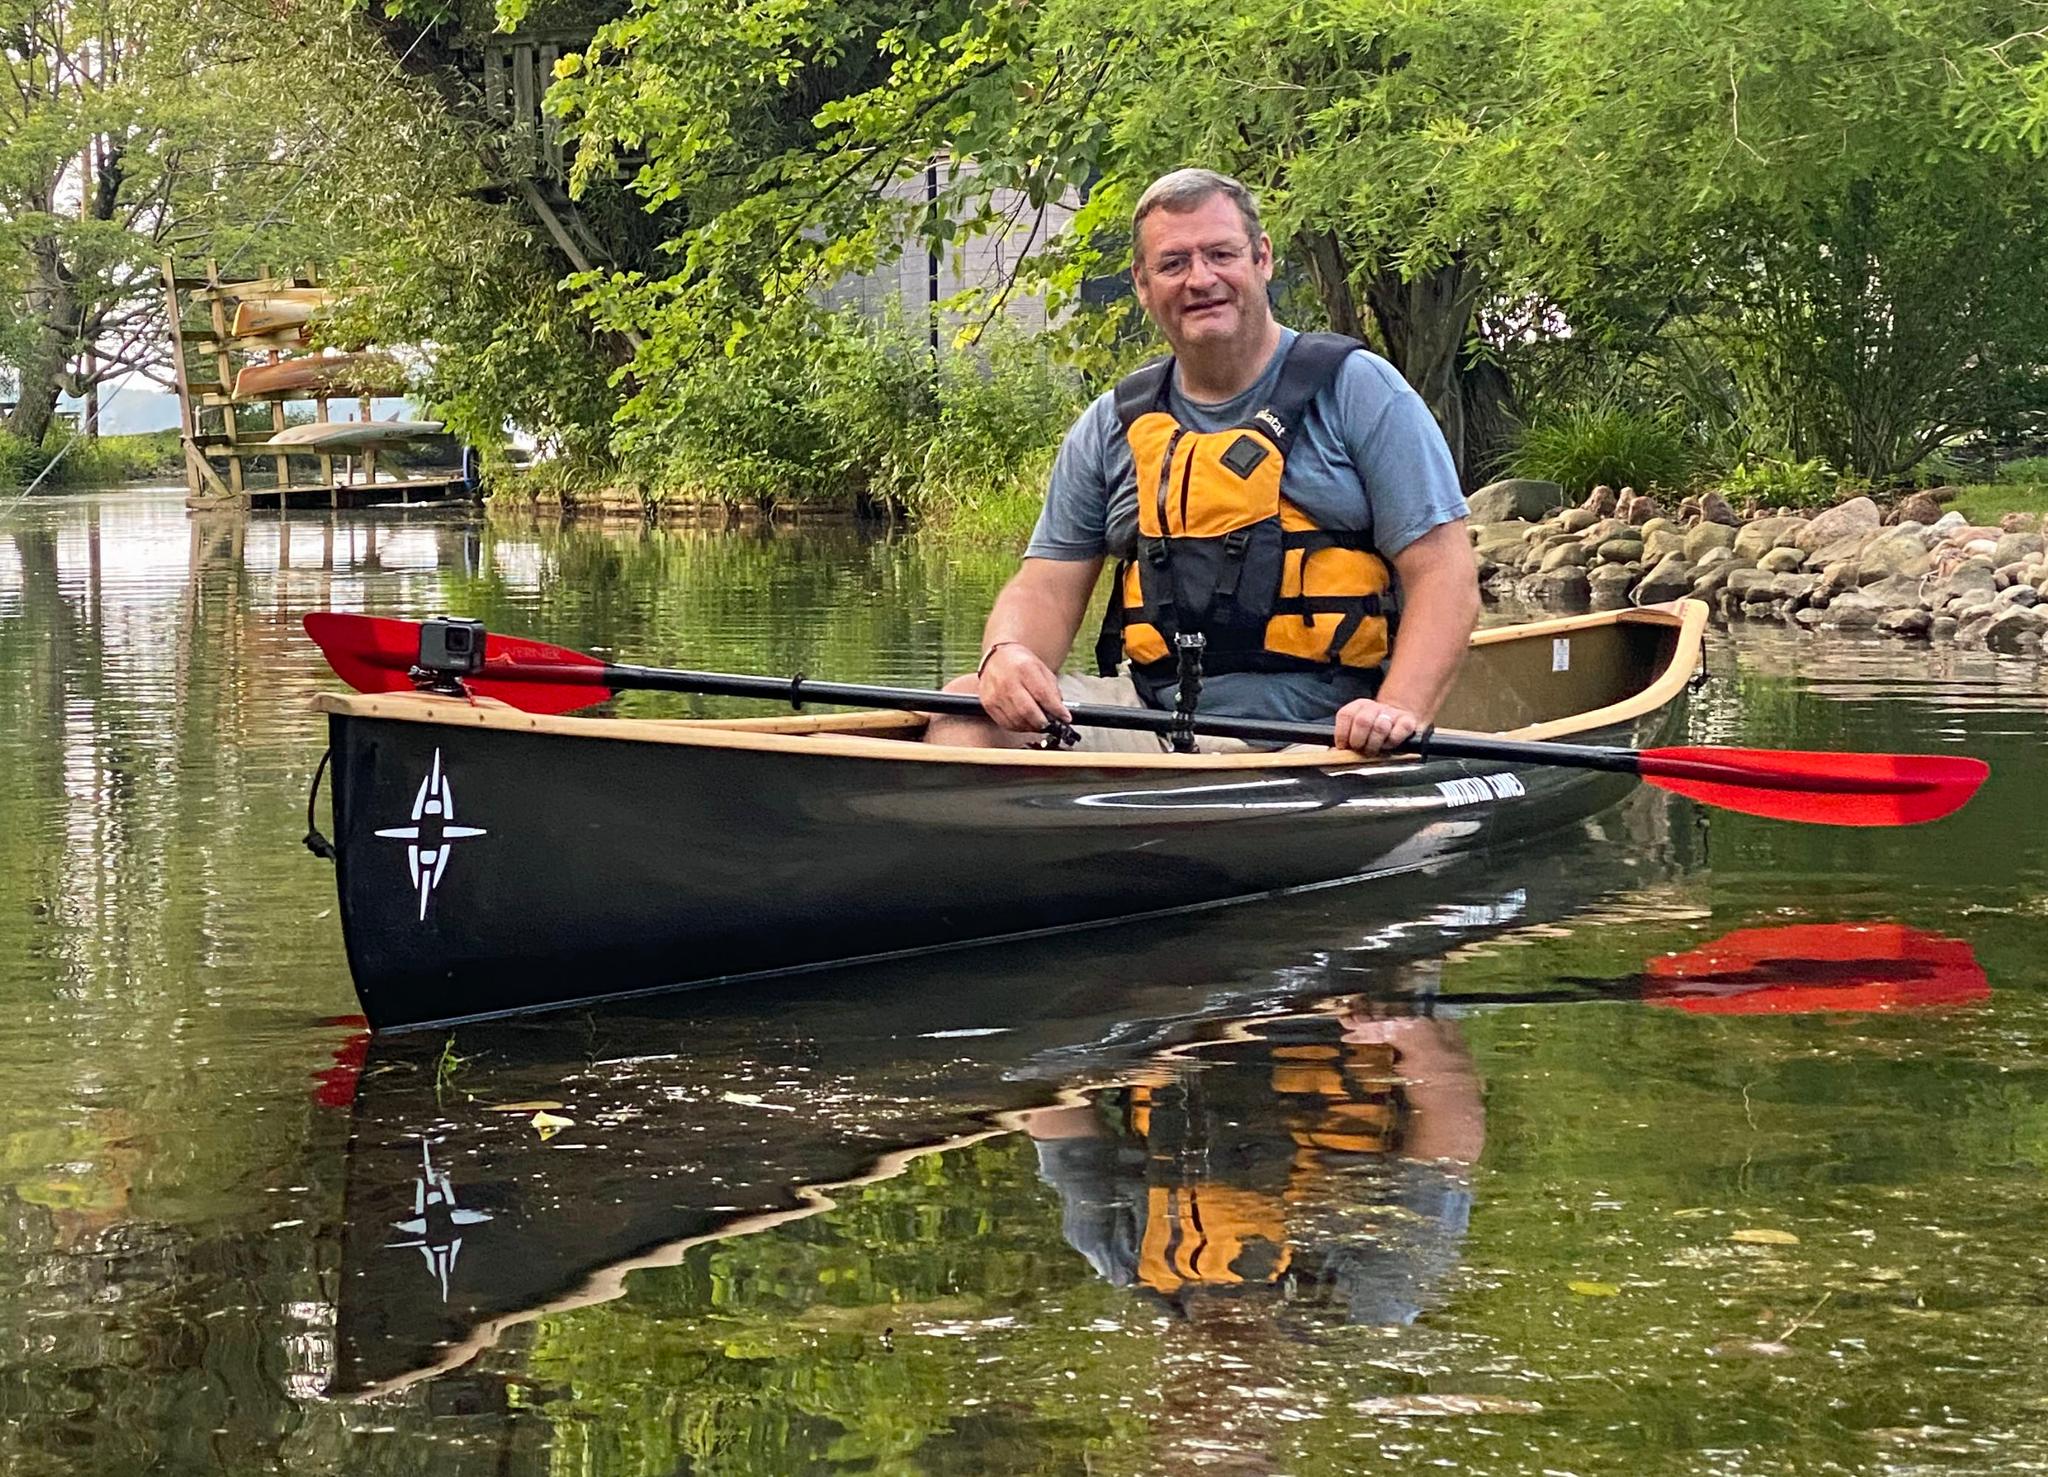 “All I want is to enjoy paddling and help others have fun and enjoy it too.”  